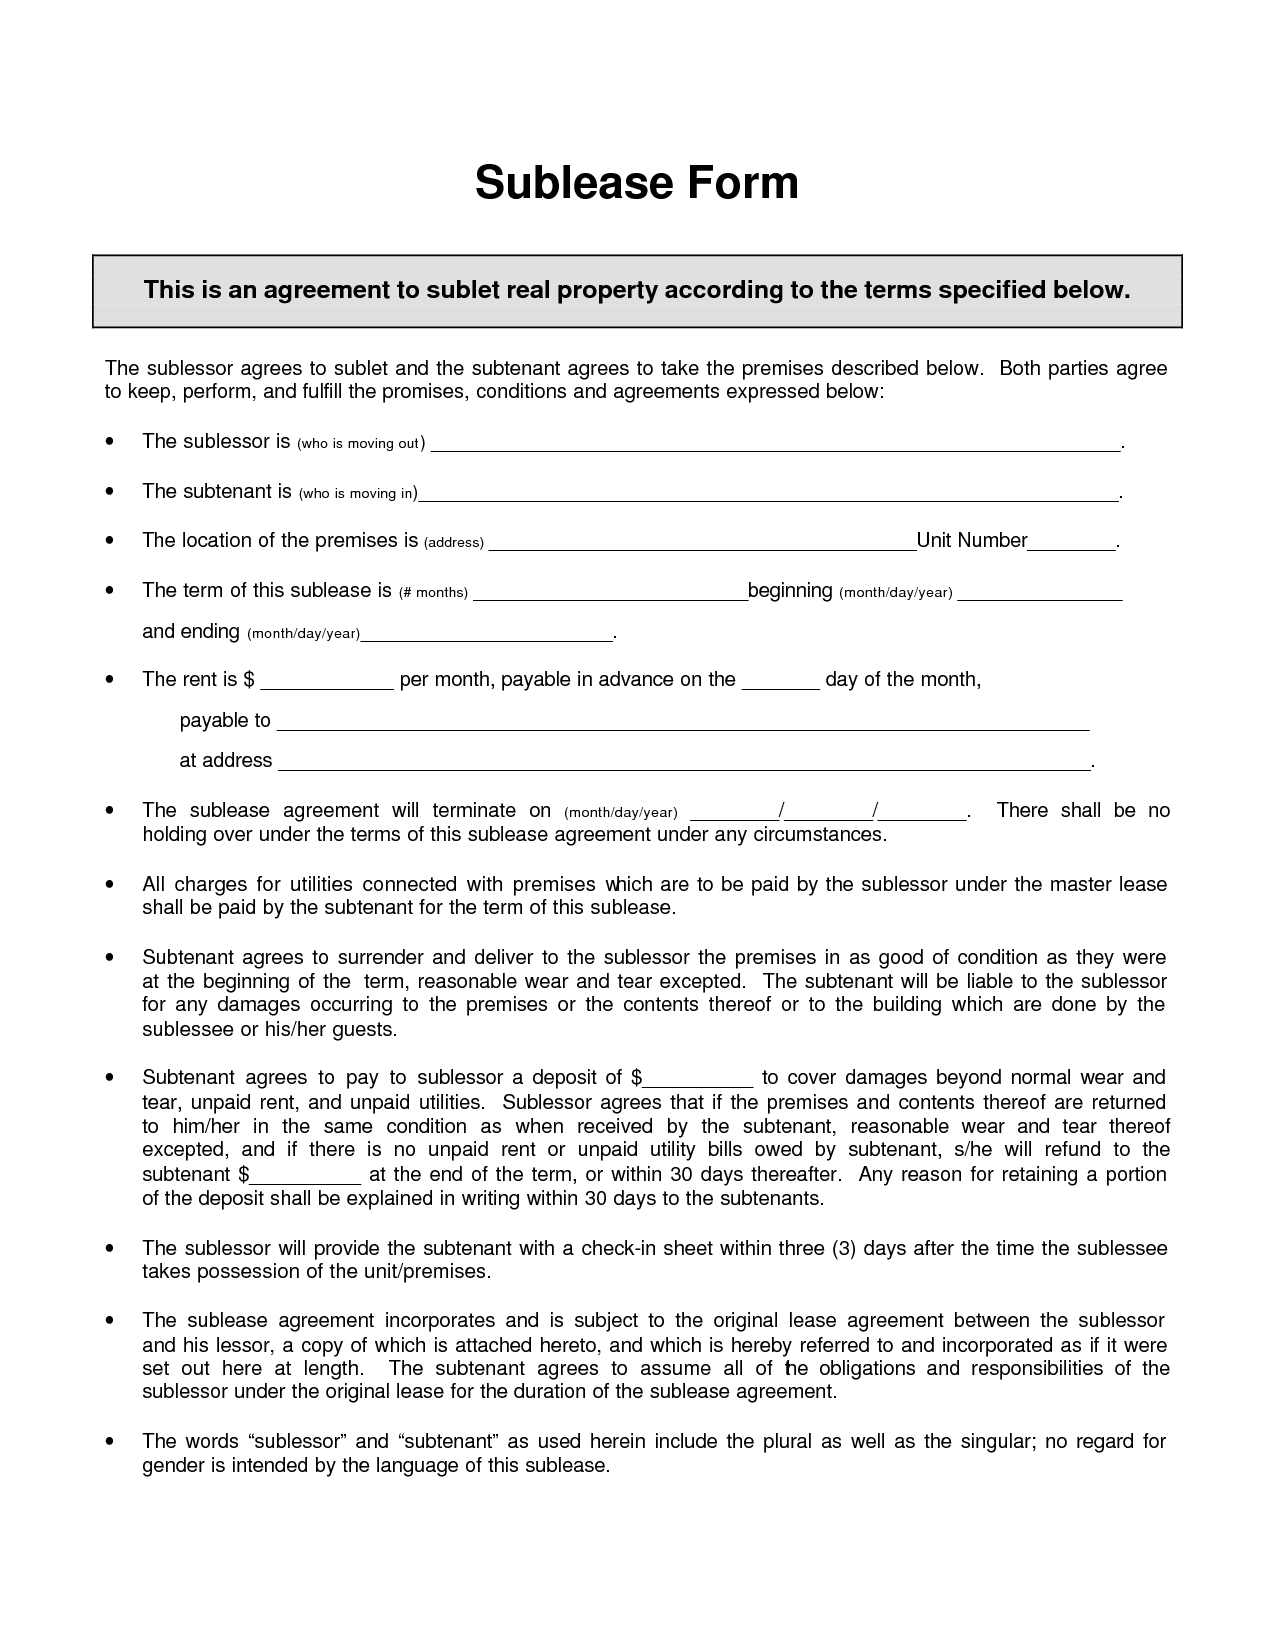 sublet-agreement-template-free-printable-documents